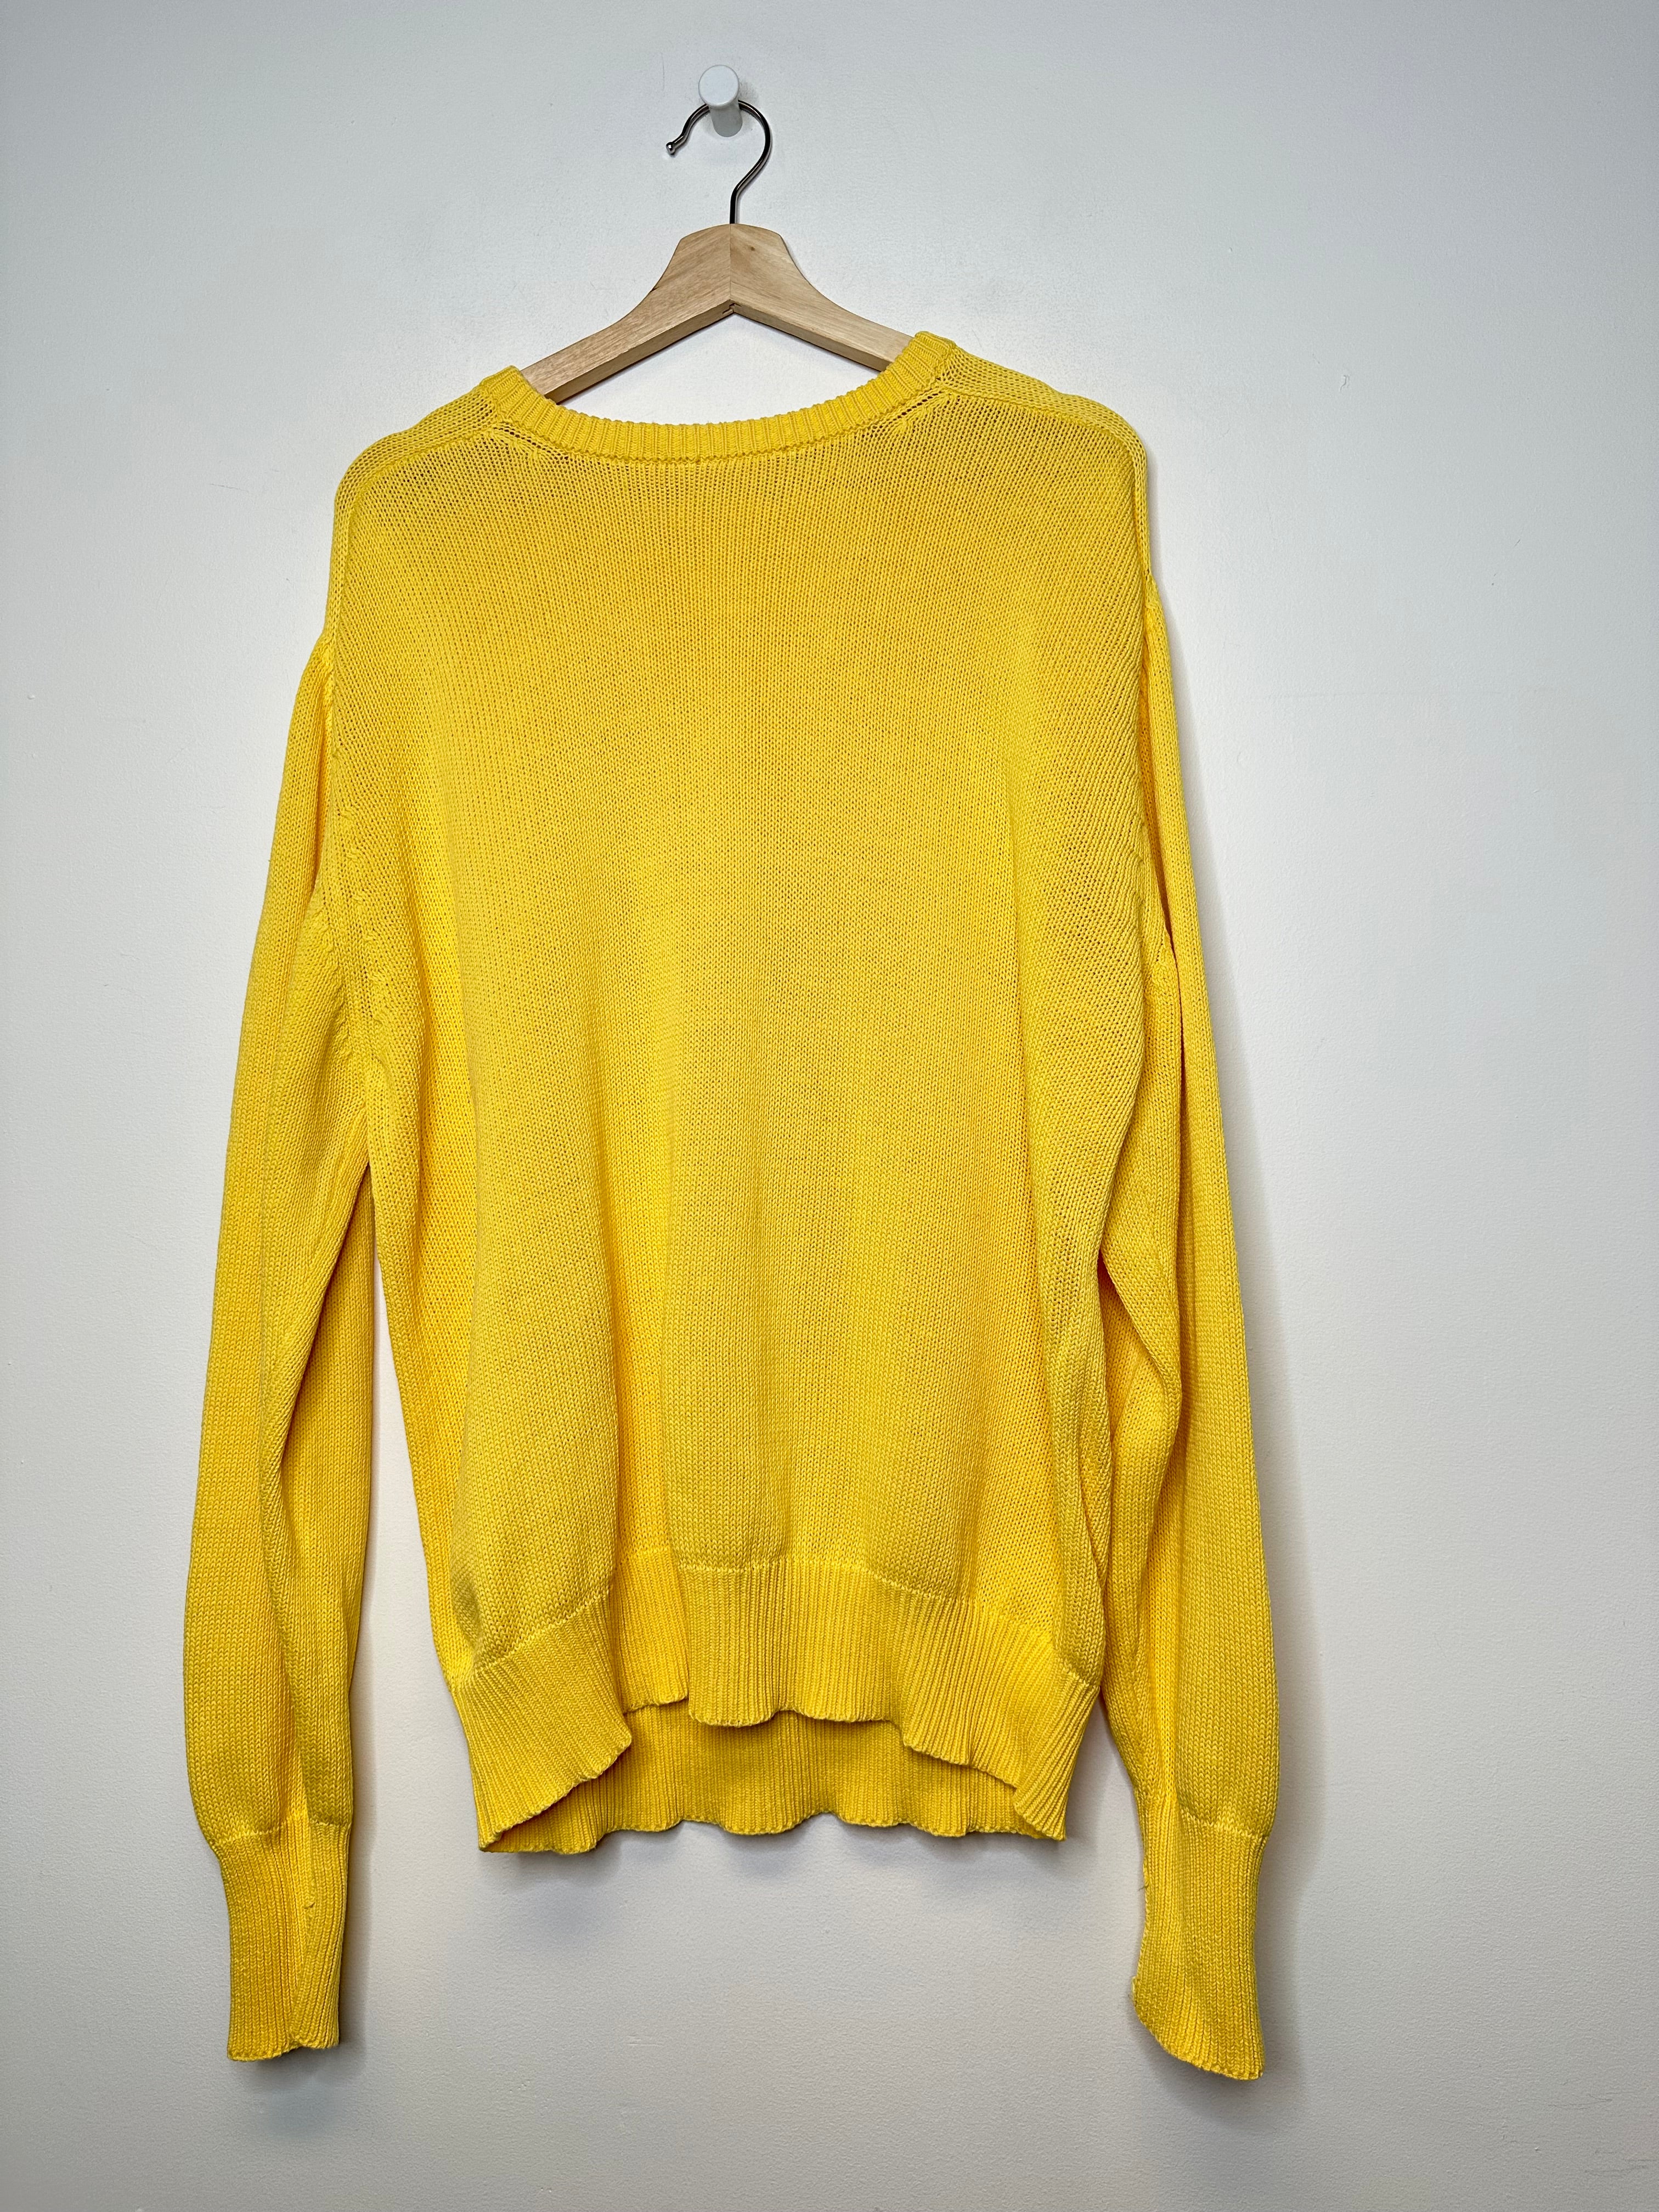 Vintage Yellow Knit Sweater - L - AS IS